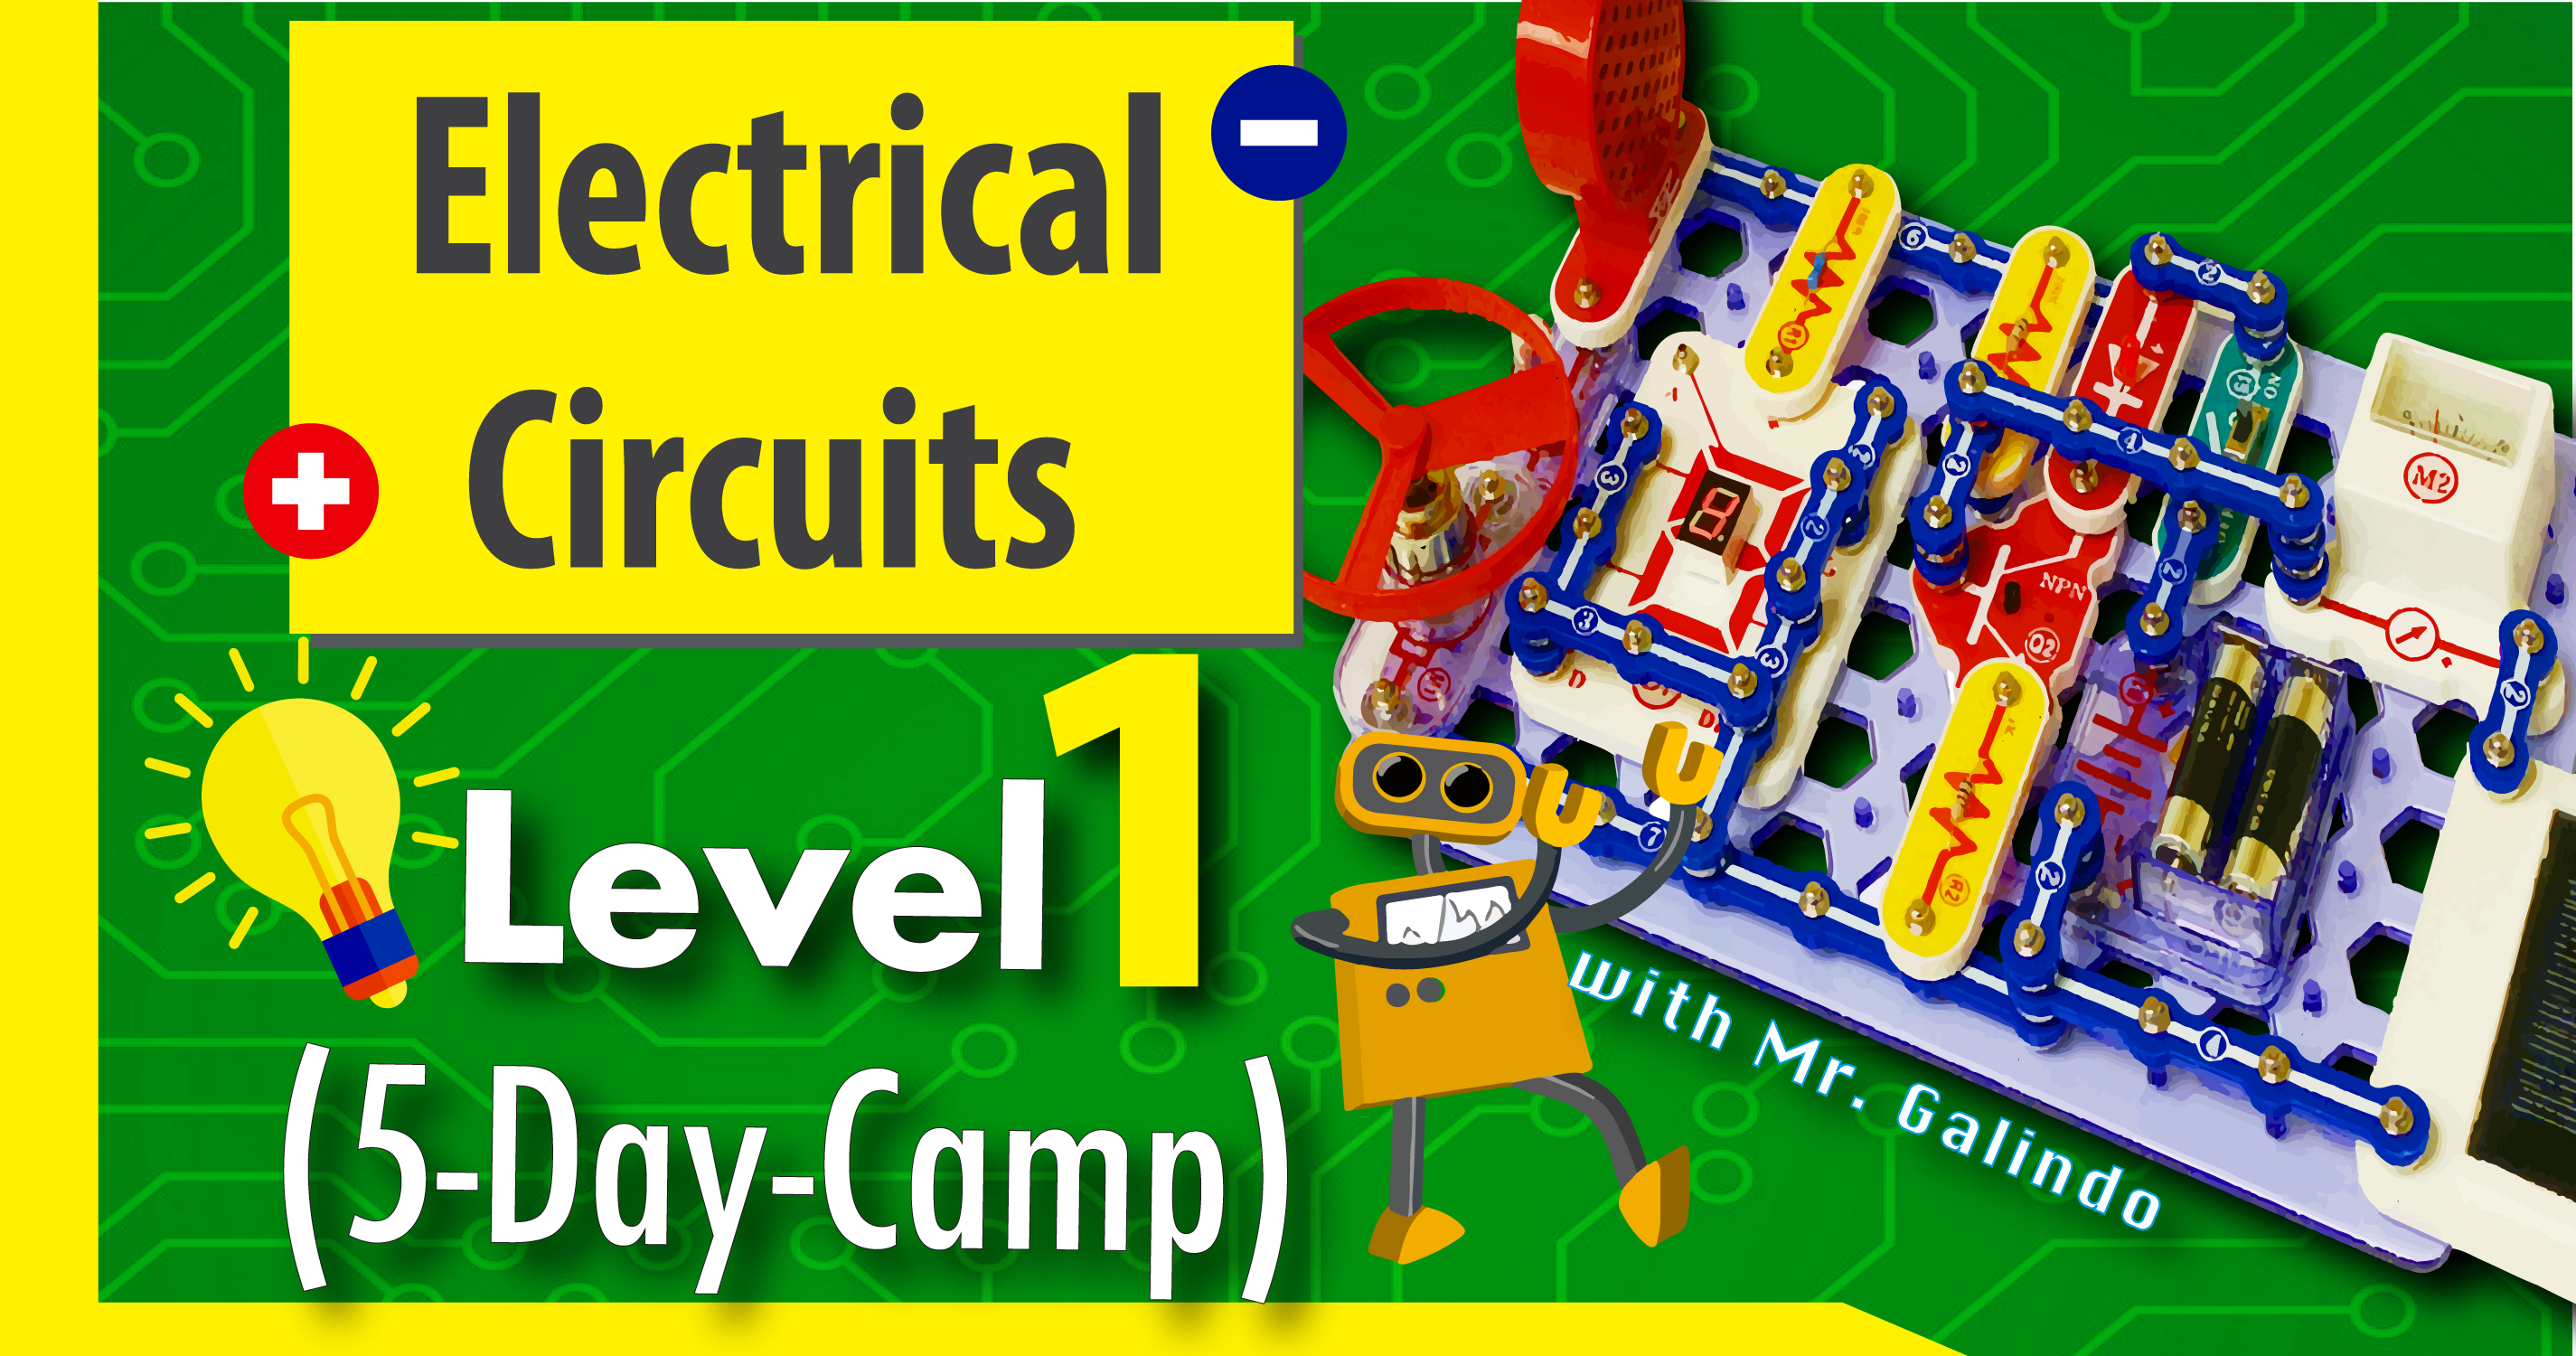 STEM CL1: Electrical Circuits Level 1 - Learn with Snap Circuits!